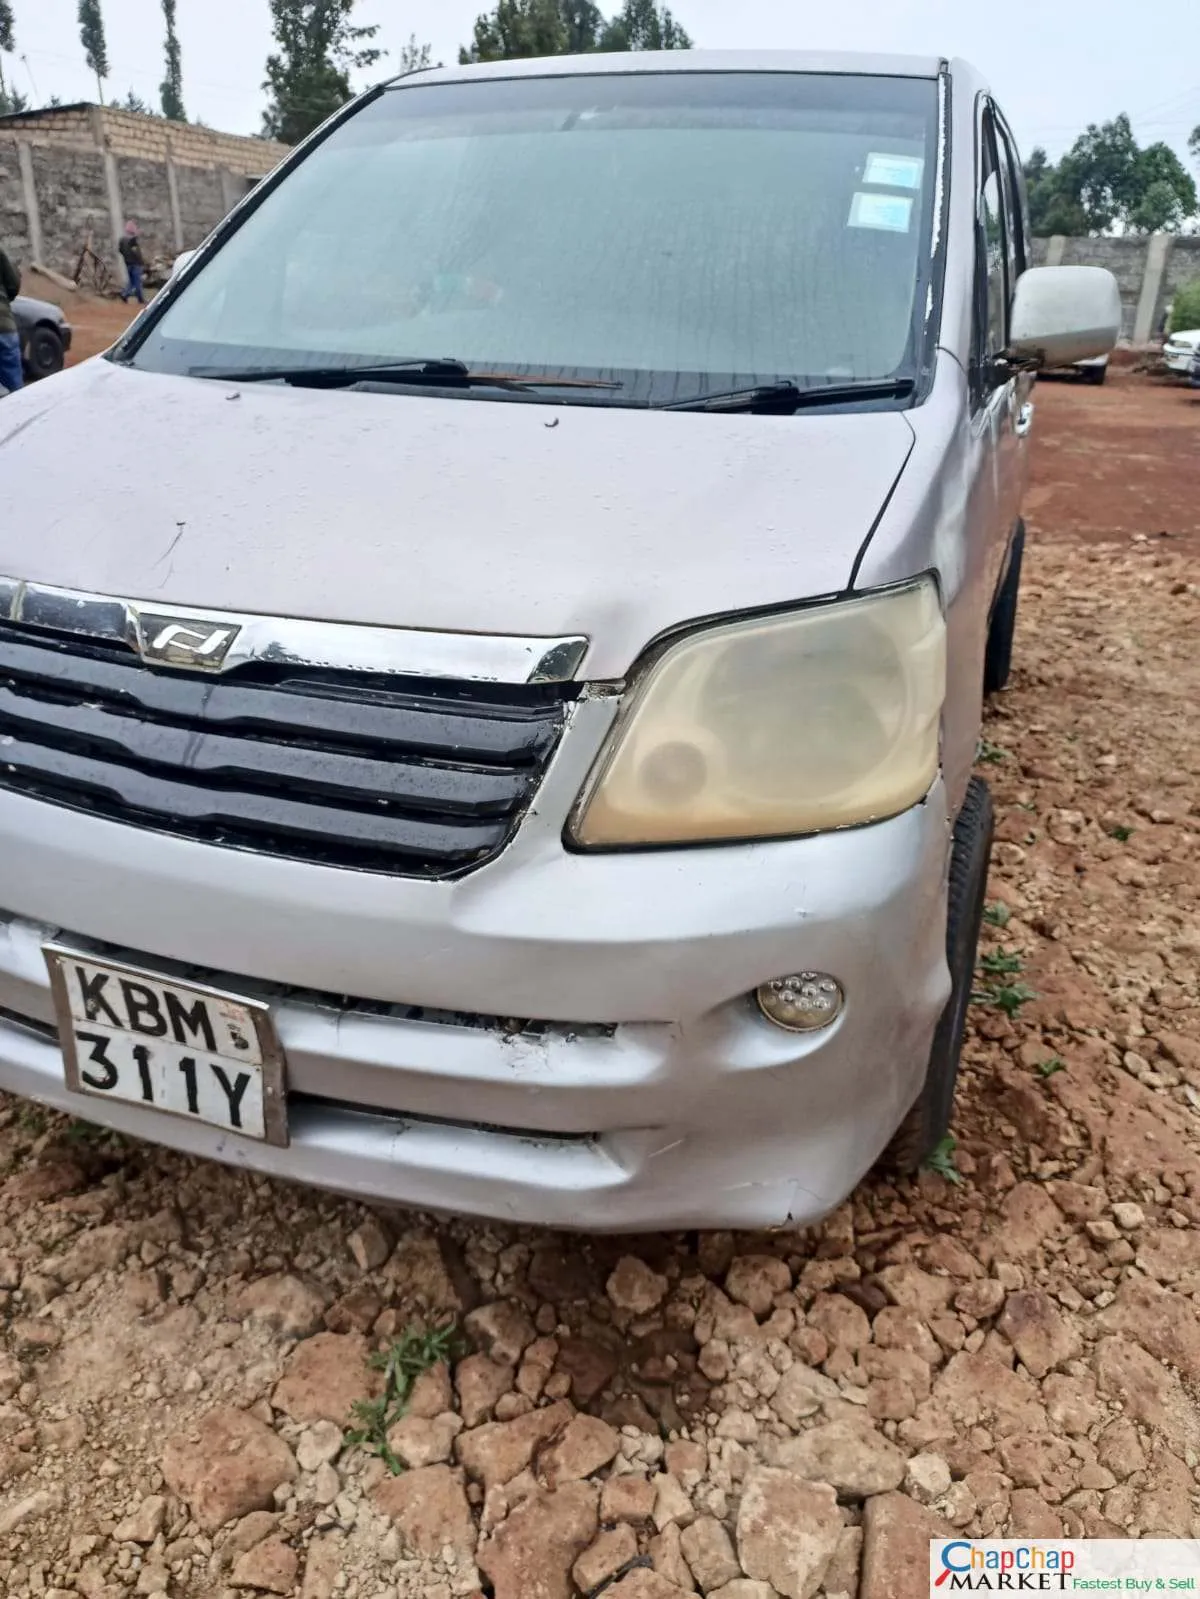 Cars Cars For Sale-Toyota NOAH for sale in Kenya 340k ONLY You Pay 30% Deposit Trade in OK EXCLUSIVE HIRE PURCHASE INSTALLMENTS 5